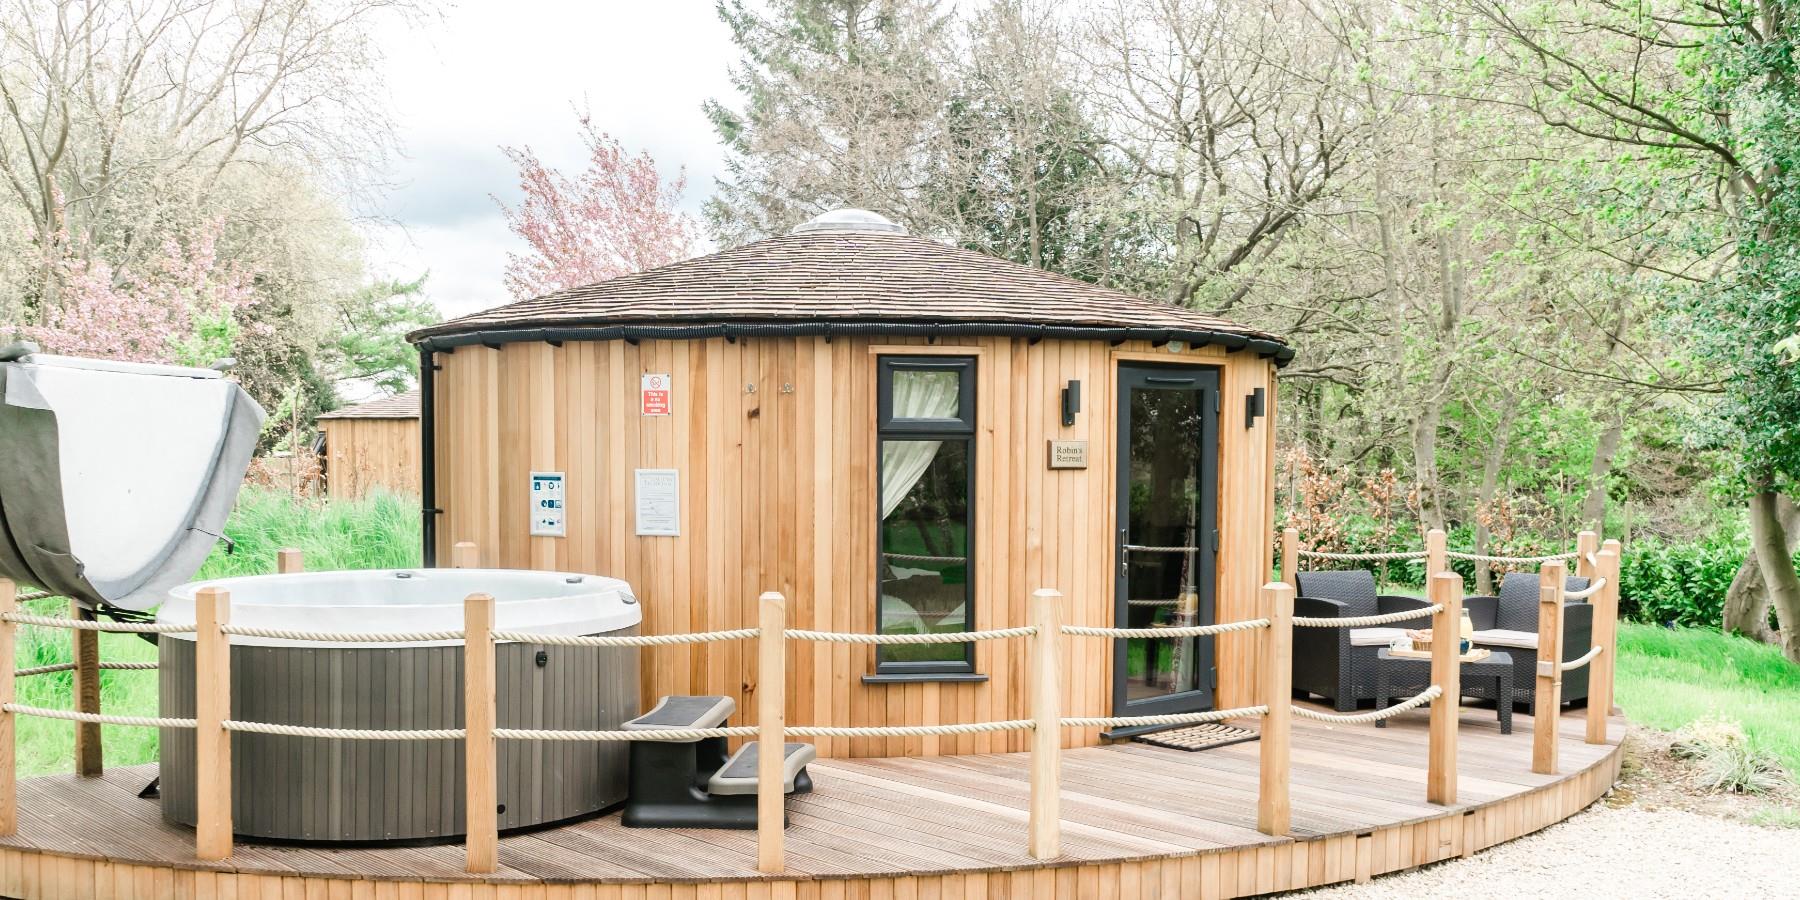 Robin roundhouse hot tub